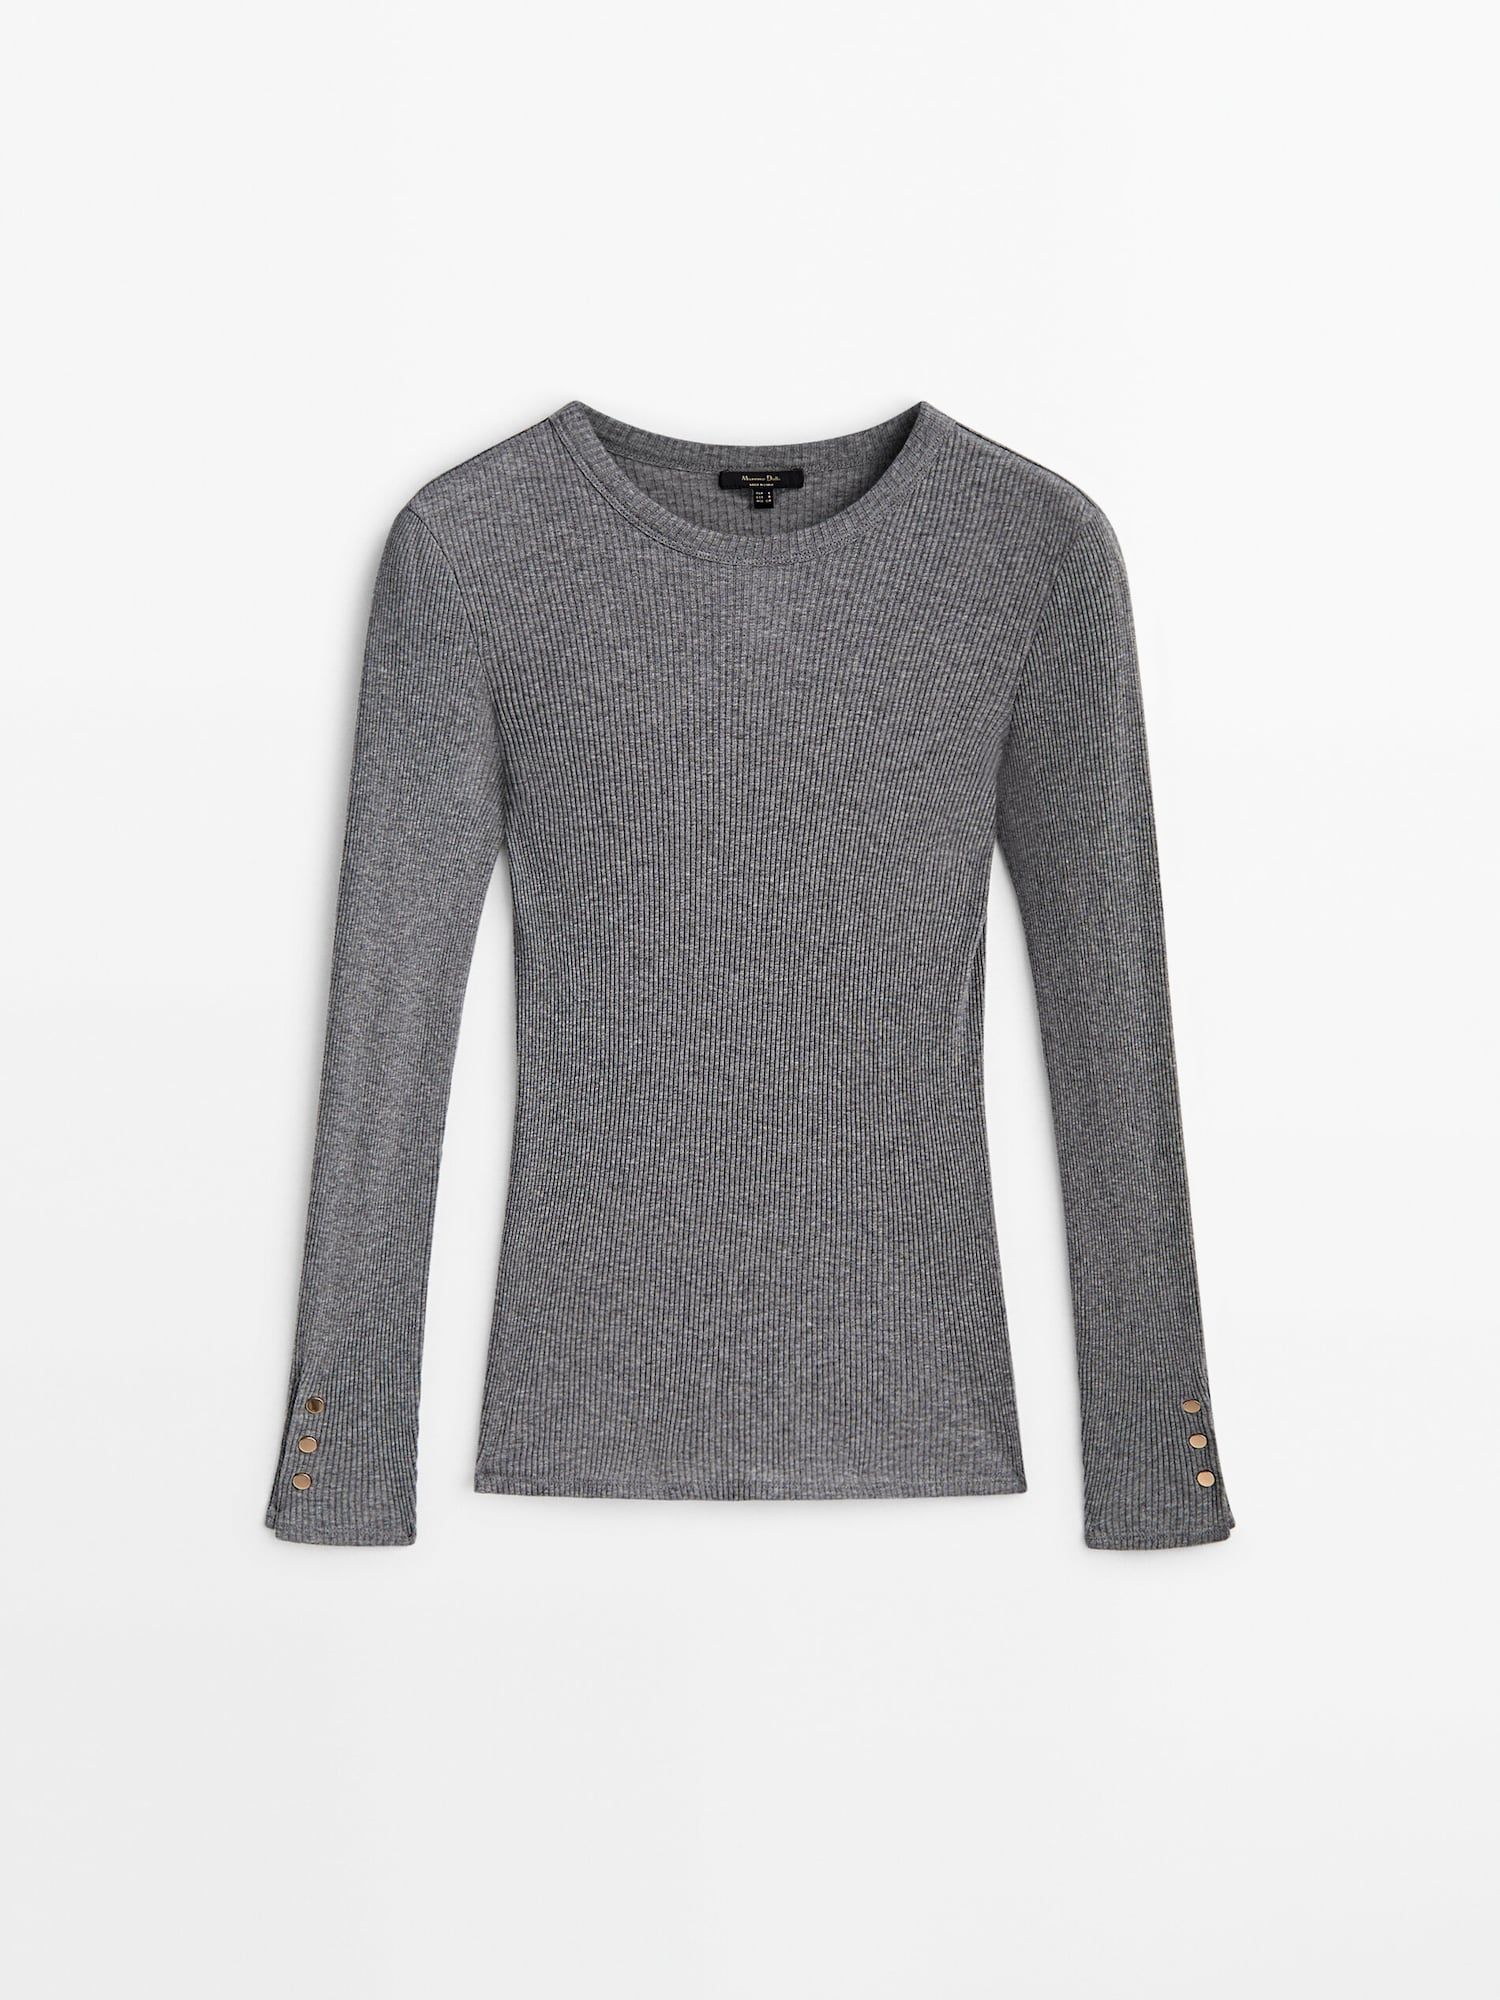 Ribbed long sleeve T-shirt with button details | Massimo Dutti UK